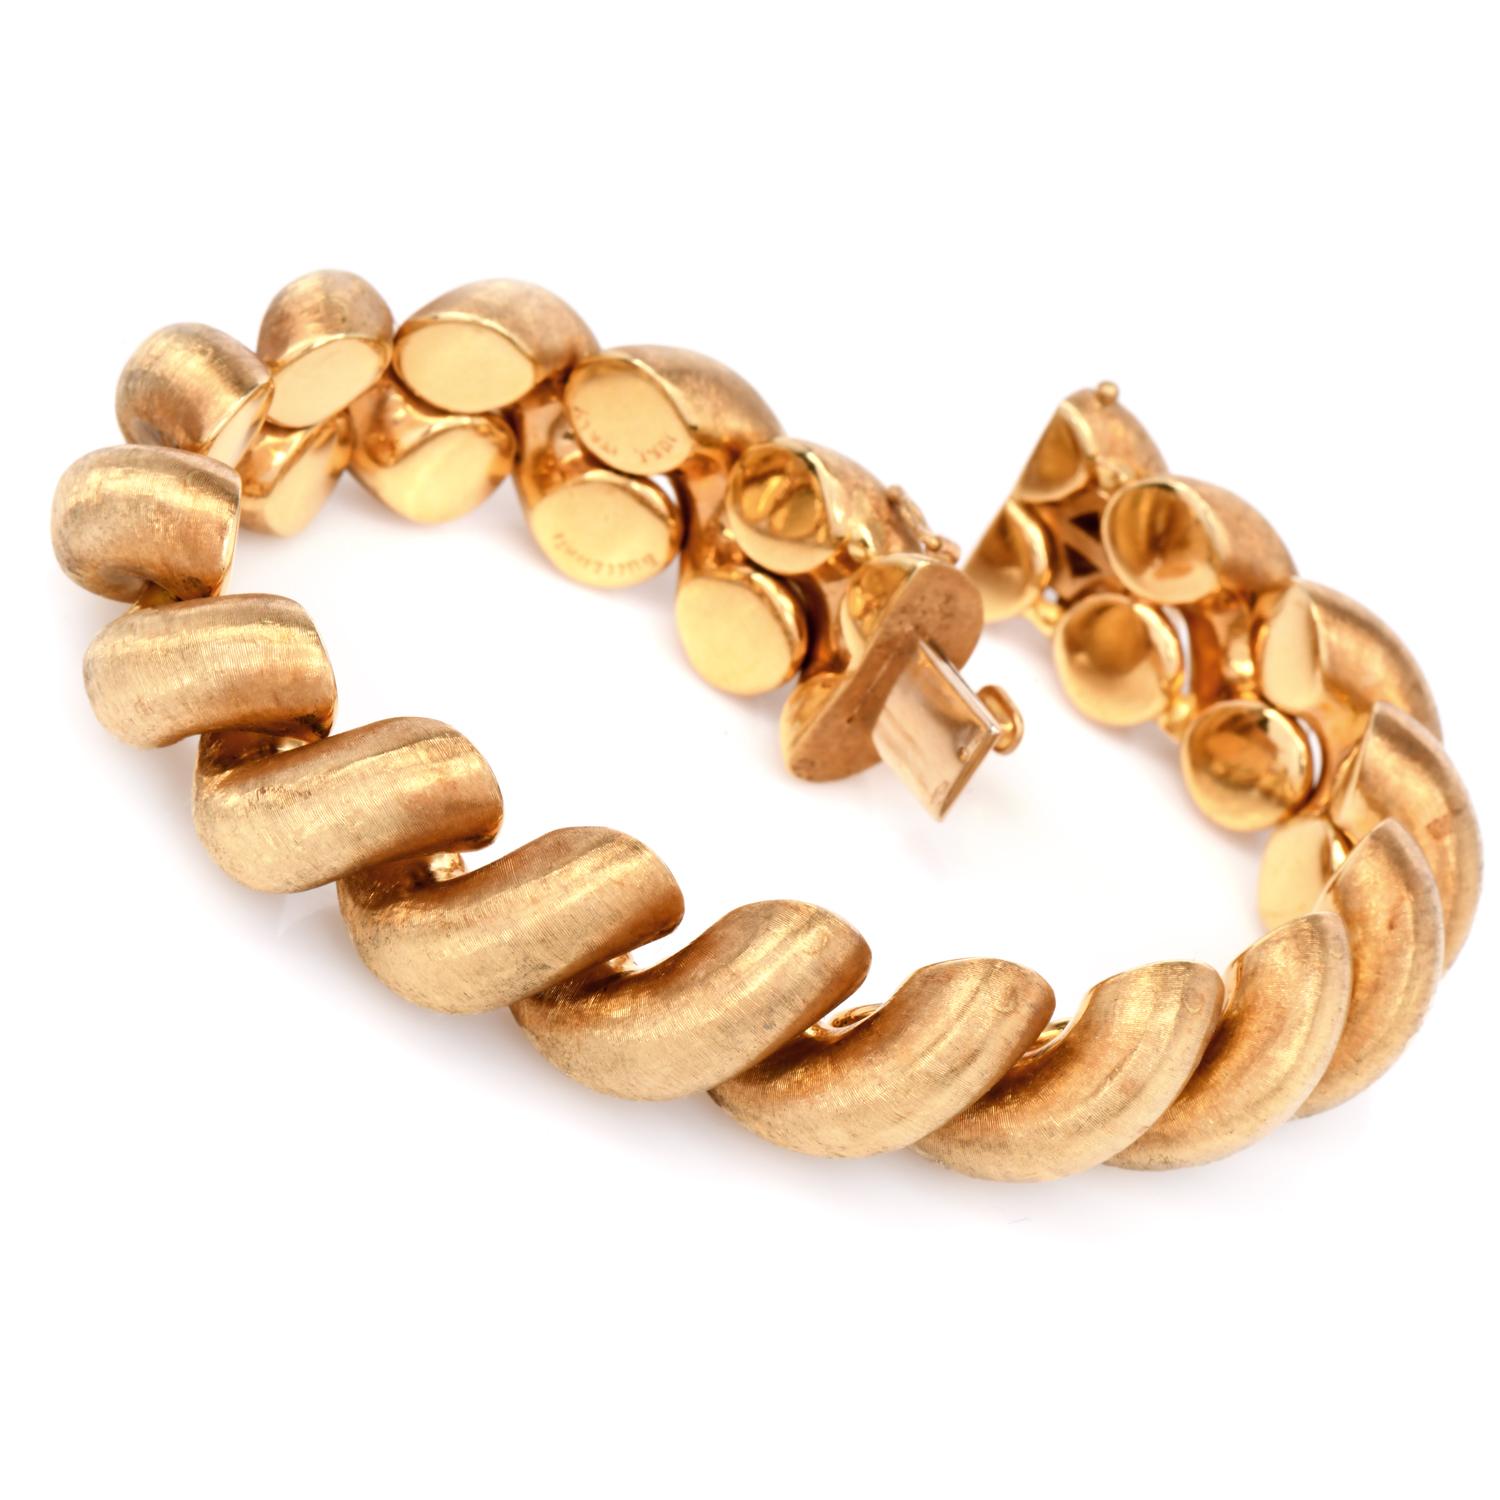 This Buccellati bracelet is a must-have. Buccellati is famous for its exquisite textured jewelry and workmanship. It is handcrafted using traditional Buccellati Rigato techniques with satin finish in excellent condition ready to be a part of your